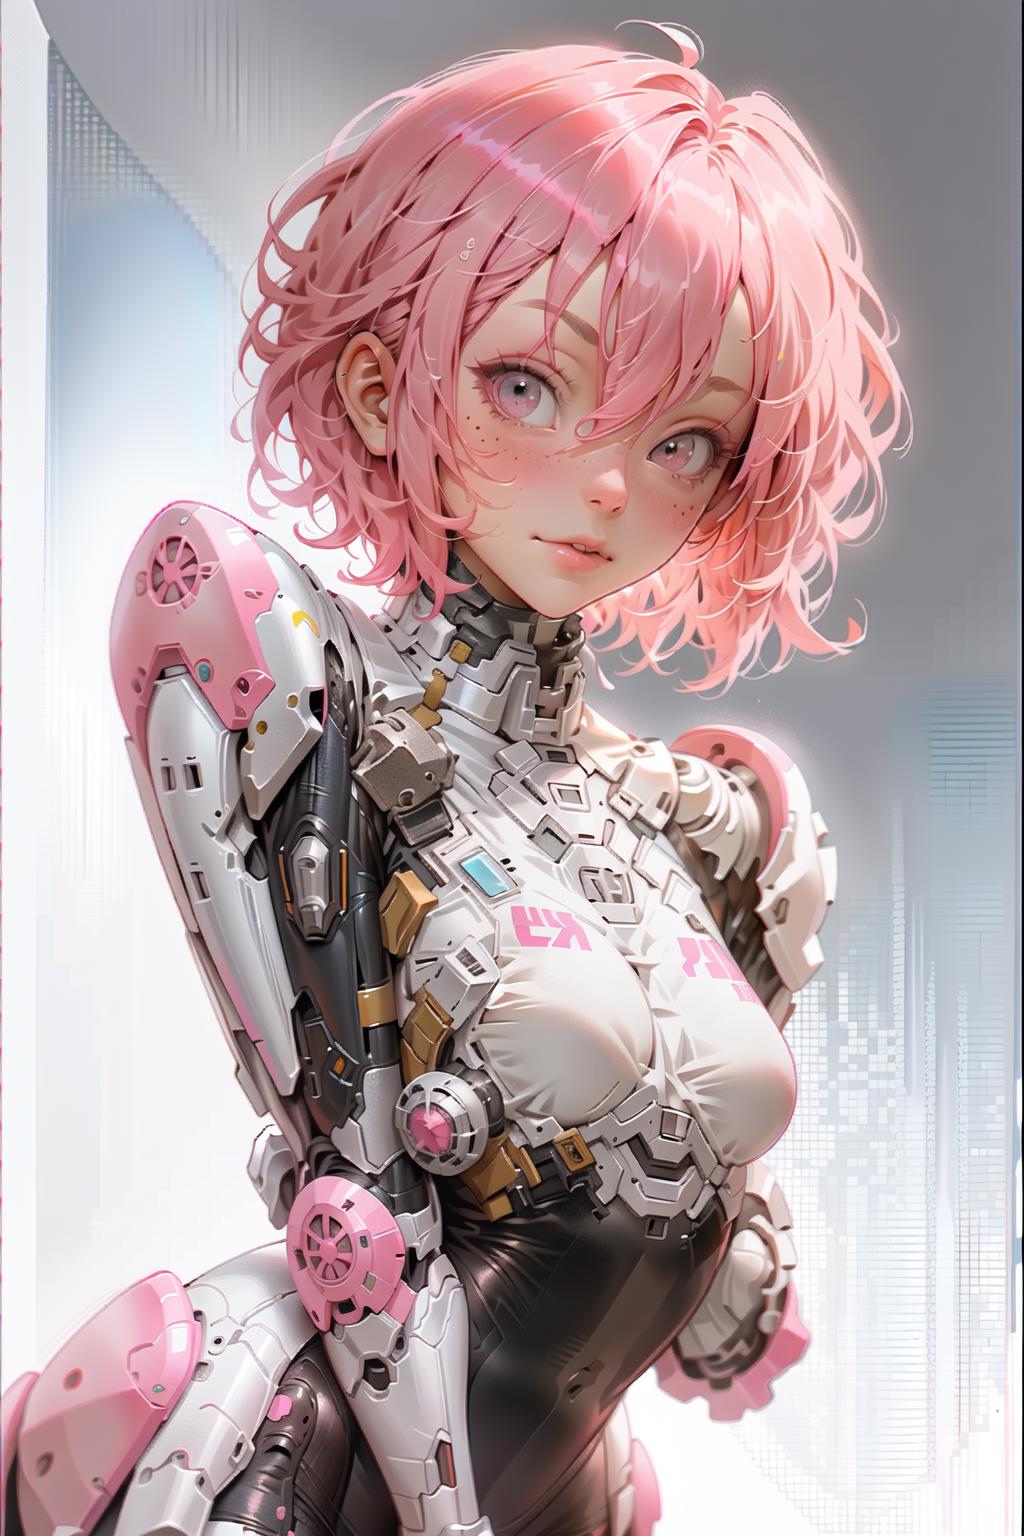 AI model image by yht584770